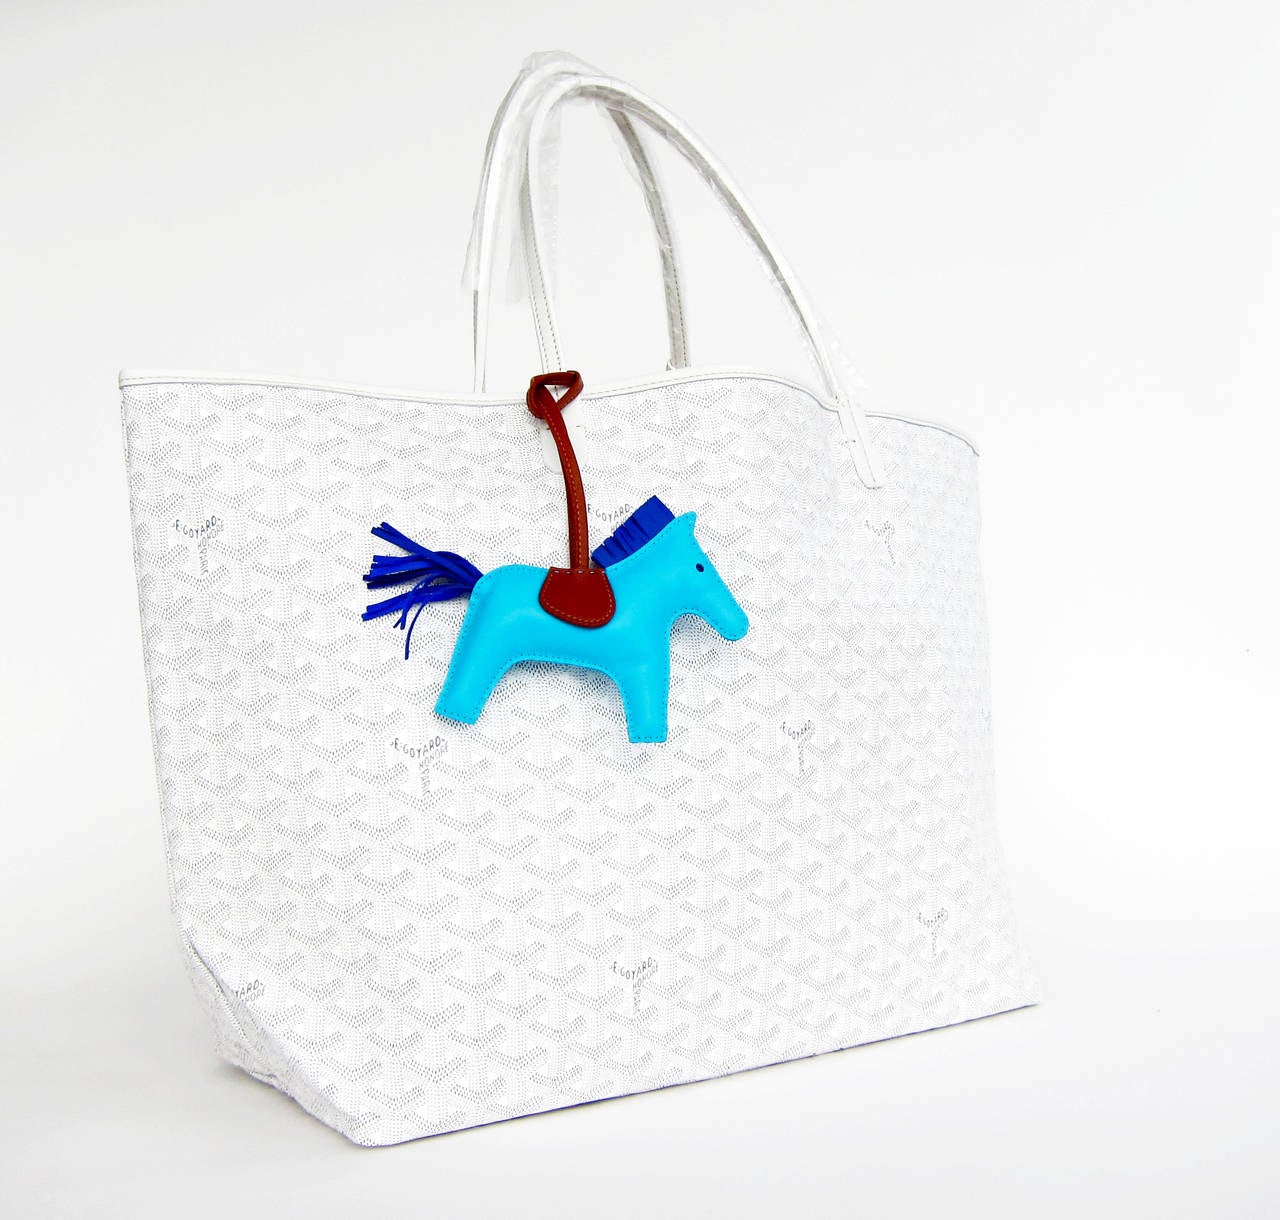 Goyard St Louis GM White Chevron Tote Bag SUMMER

Brand New coming with yellow Goyard sleeper and inner pochette
Traditional Goyard Chevron Tote in white/grey canvas 
GM (large) size:  Length: 23